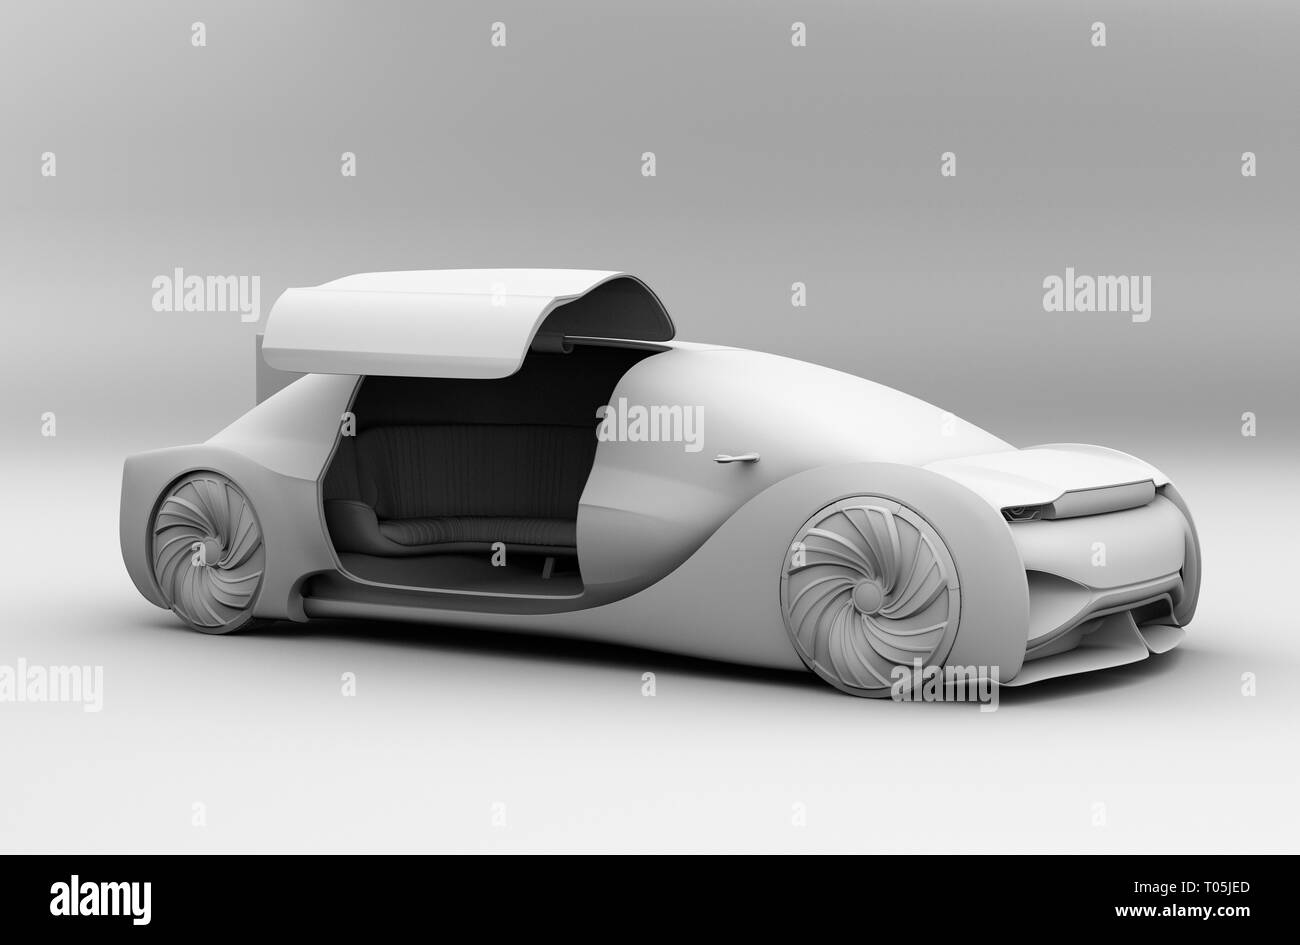 Clay rendering of self driving electric car exterior. Right door opened. 3D rendering image. Stock Photo